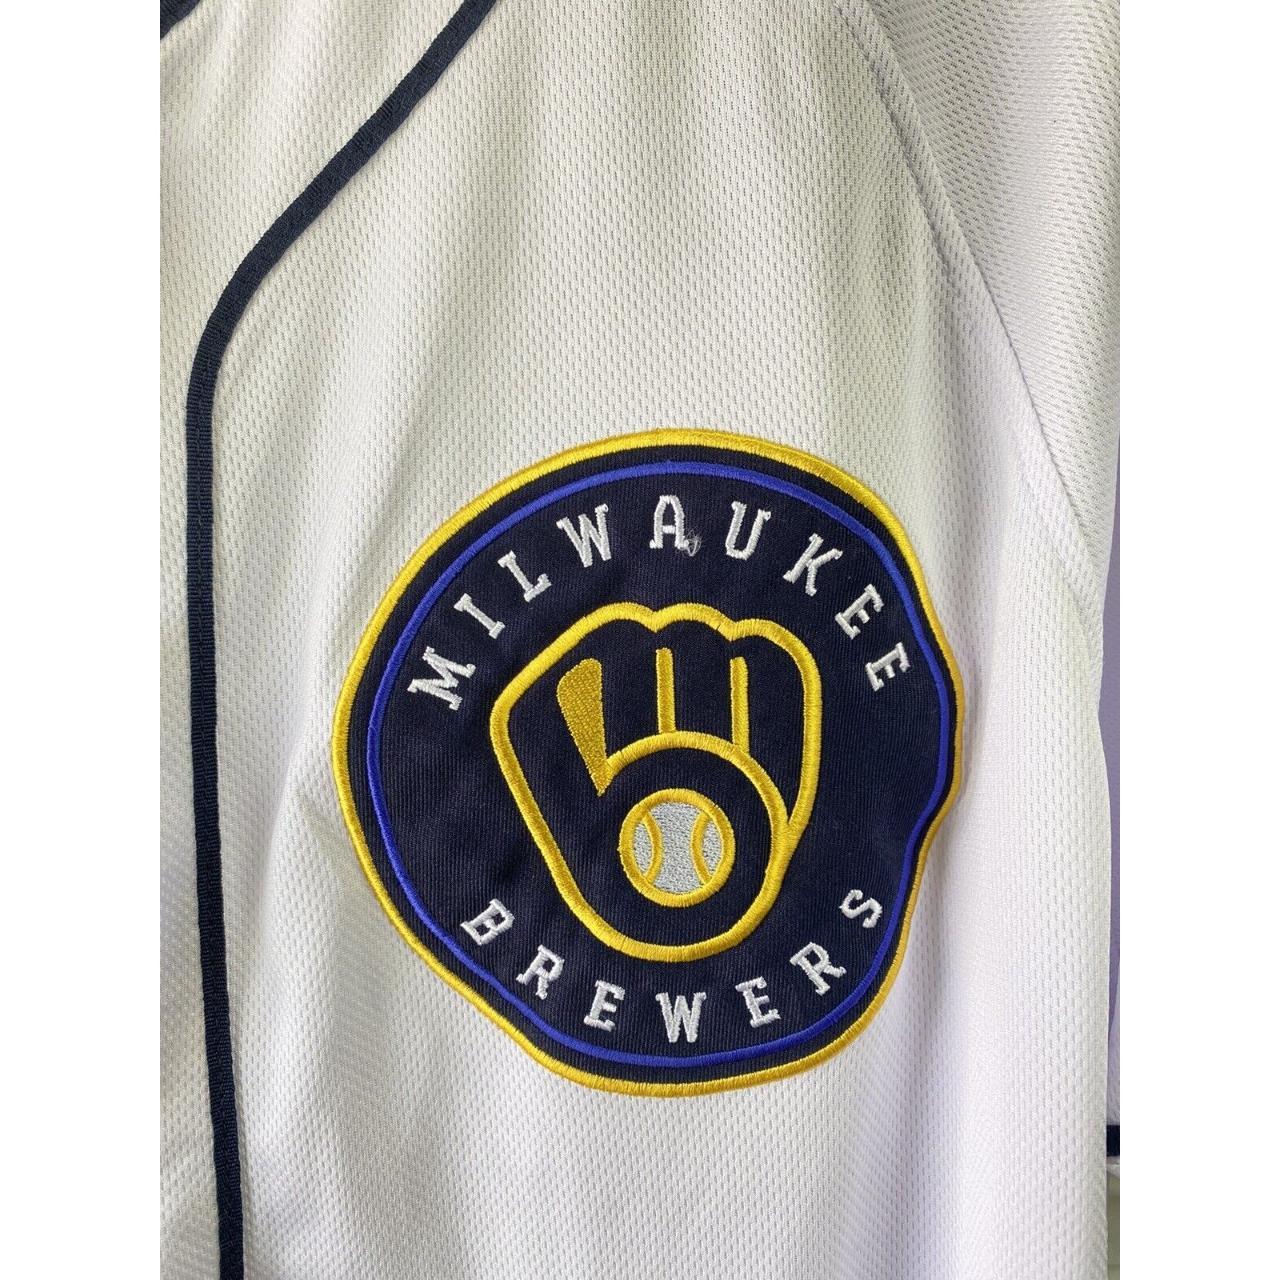 Milwaukee Brewers MLB Baseball Jersey Stitched Sewn Authentic Vintage Vtg